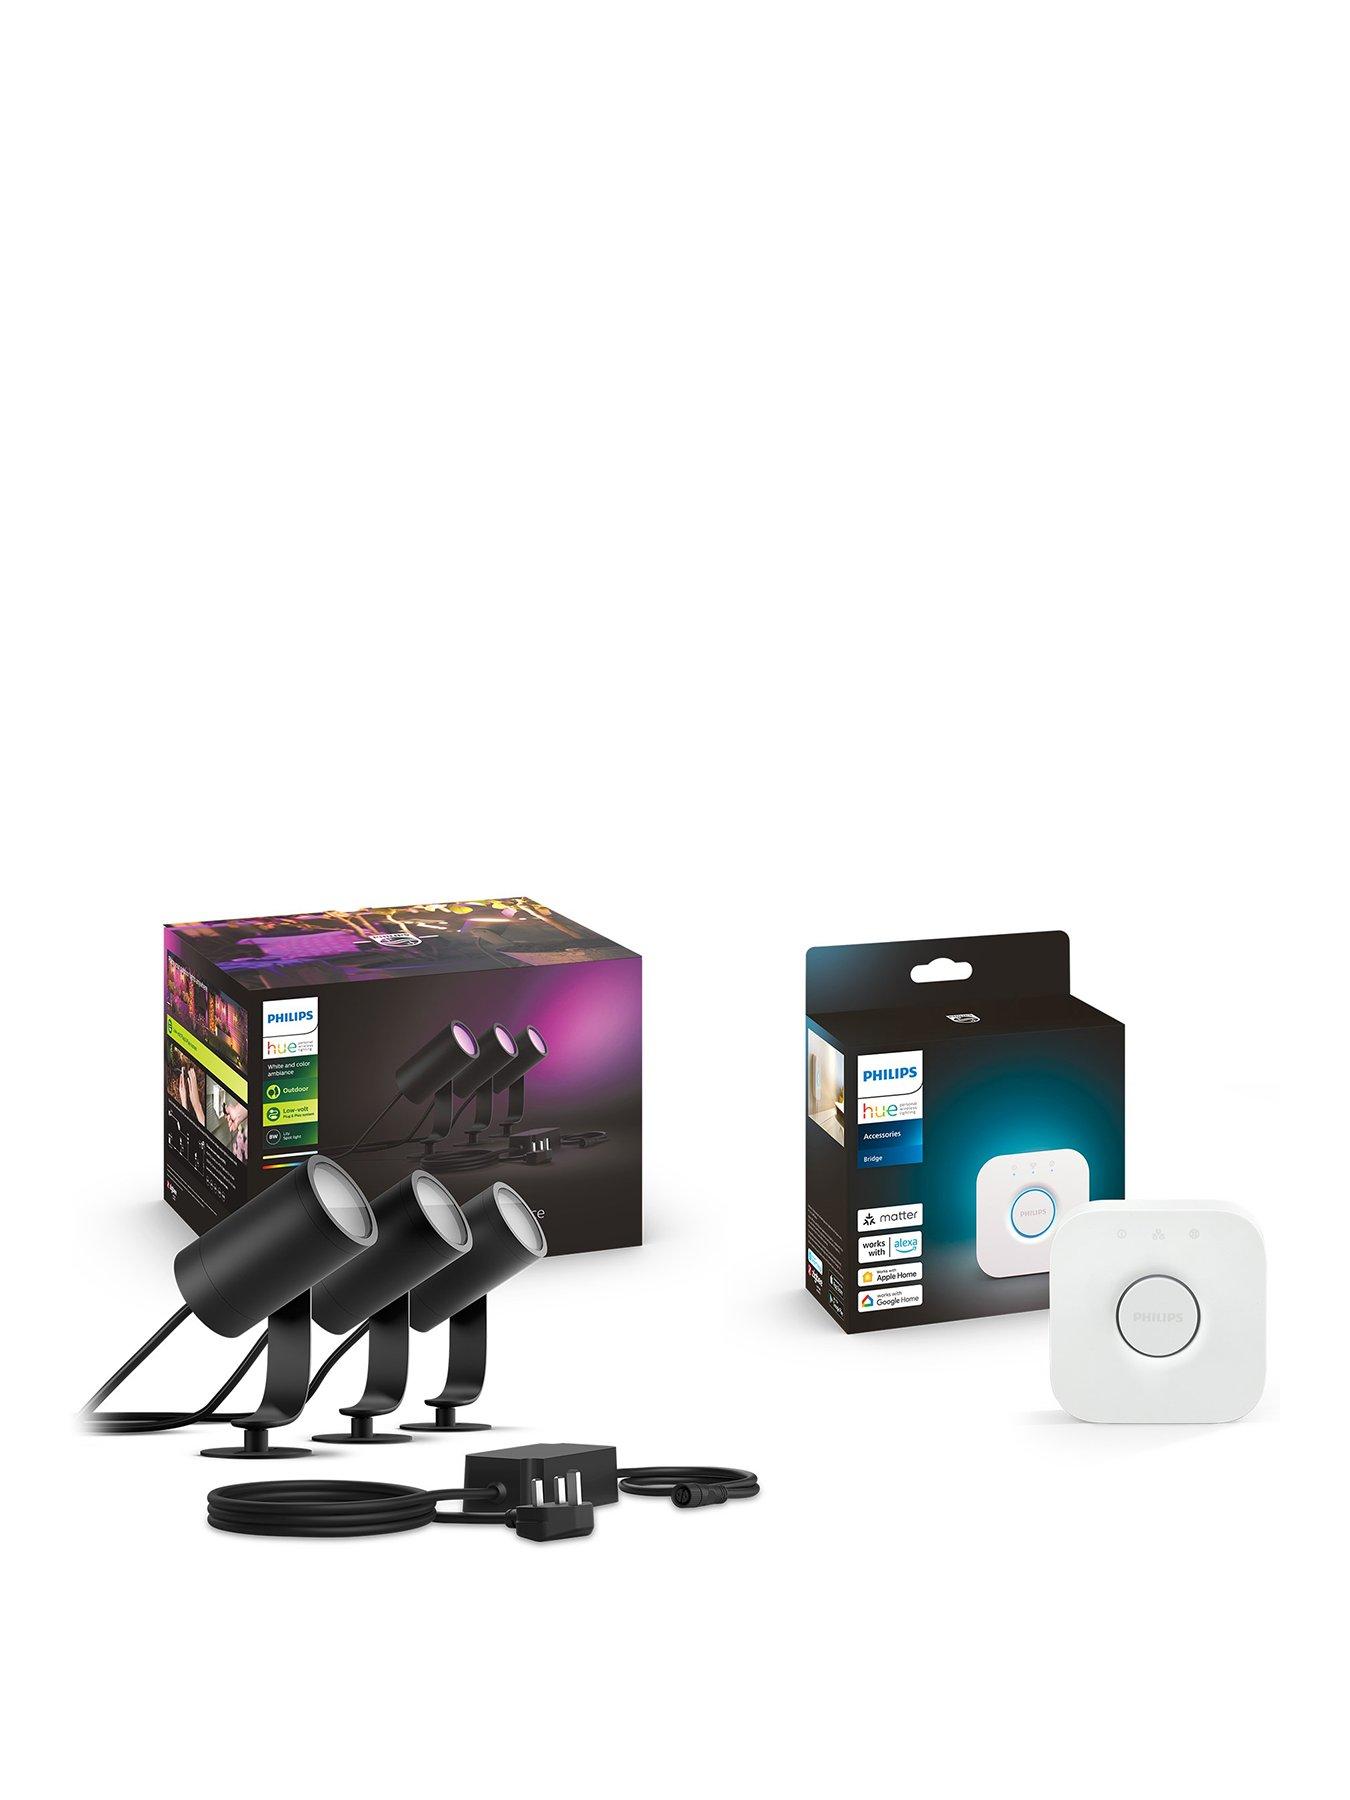 Buy Philips Hue Lily Outdoor Stake lights 3x starter kit Black